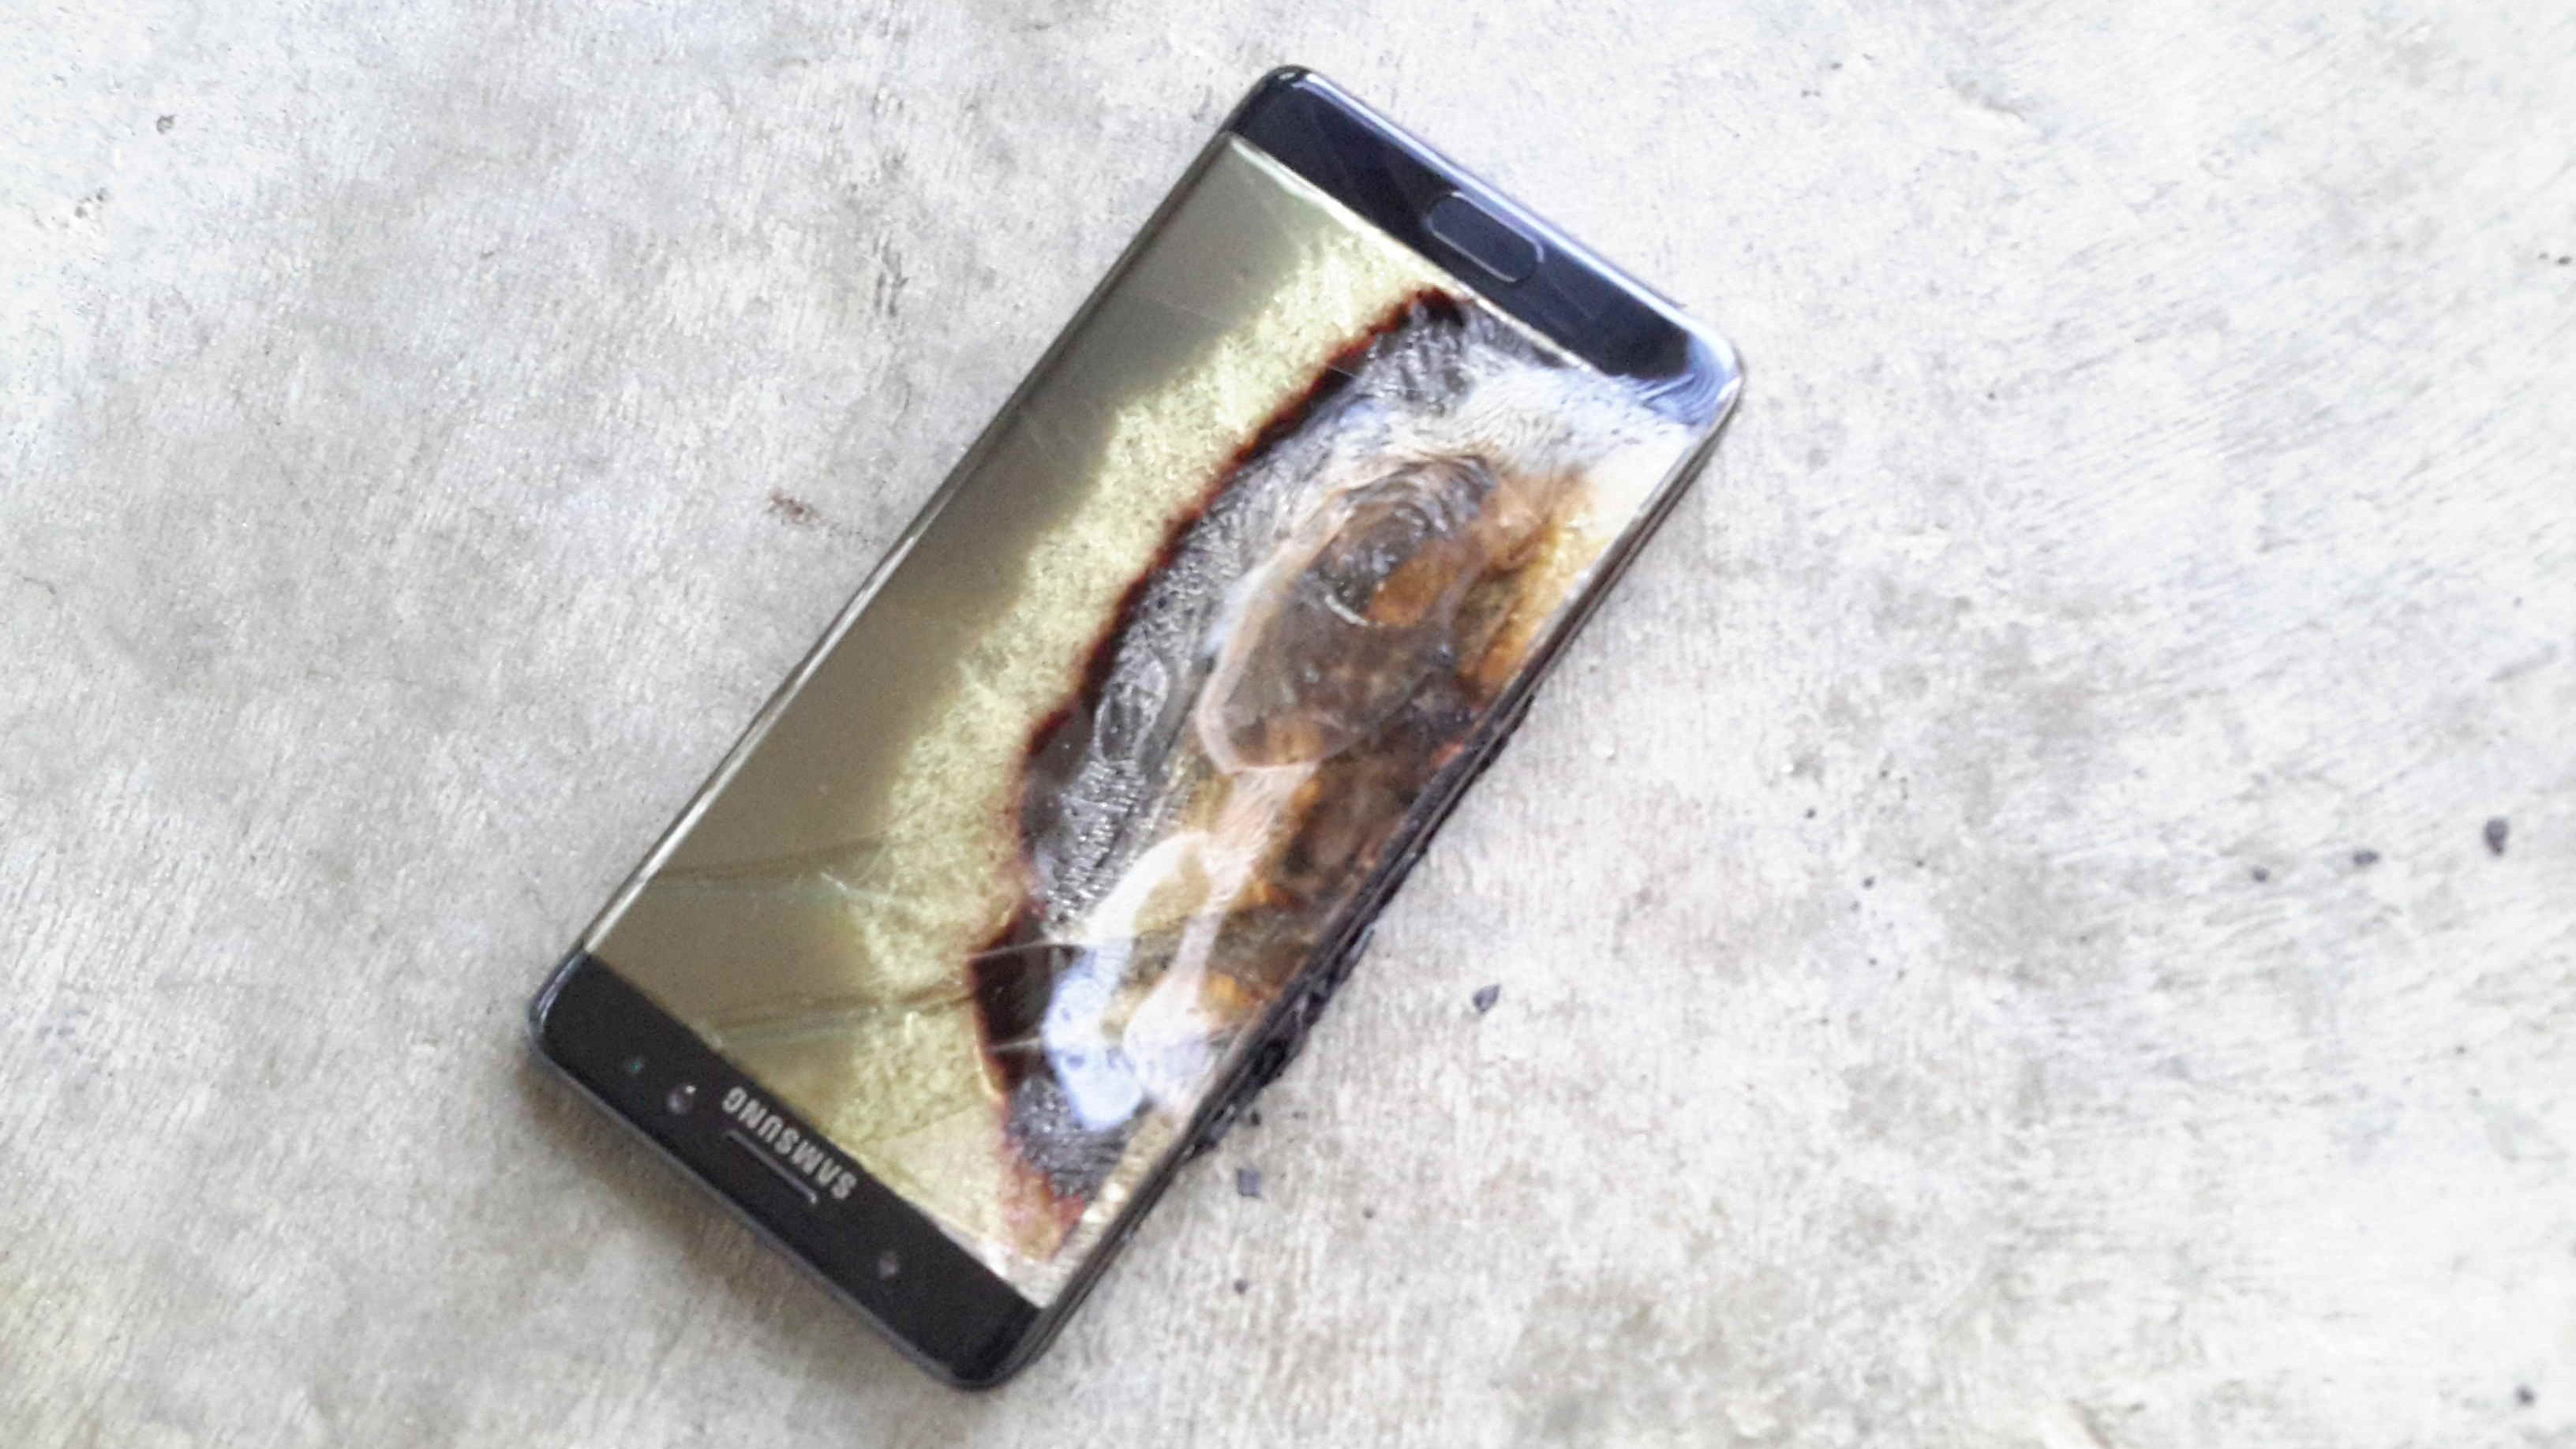 A Note 7 with an exploding battery